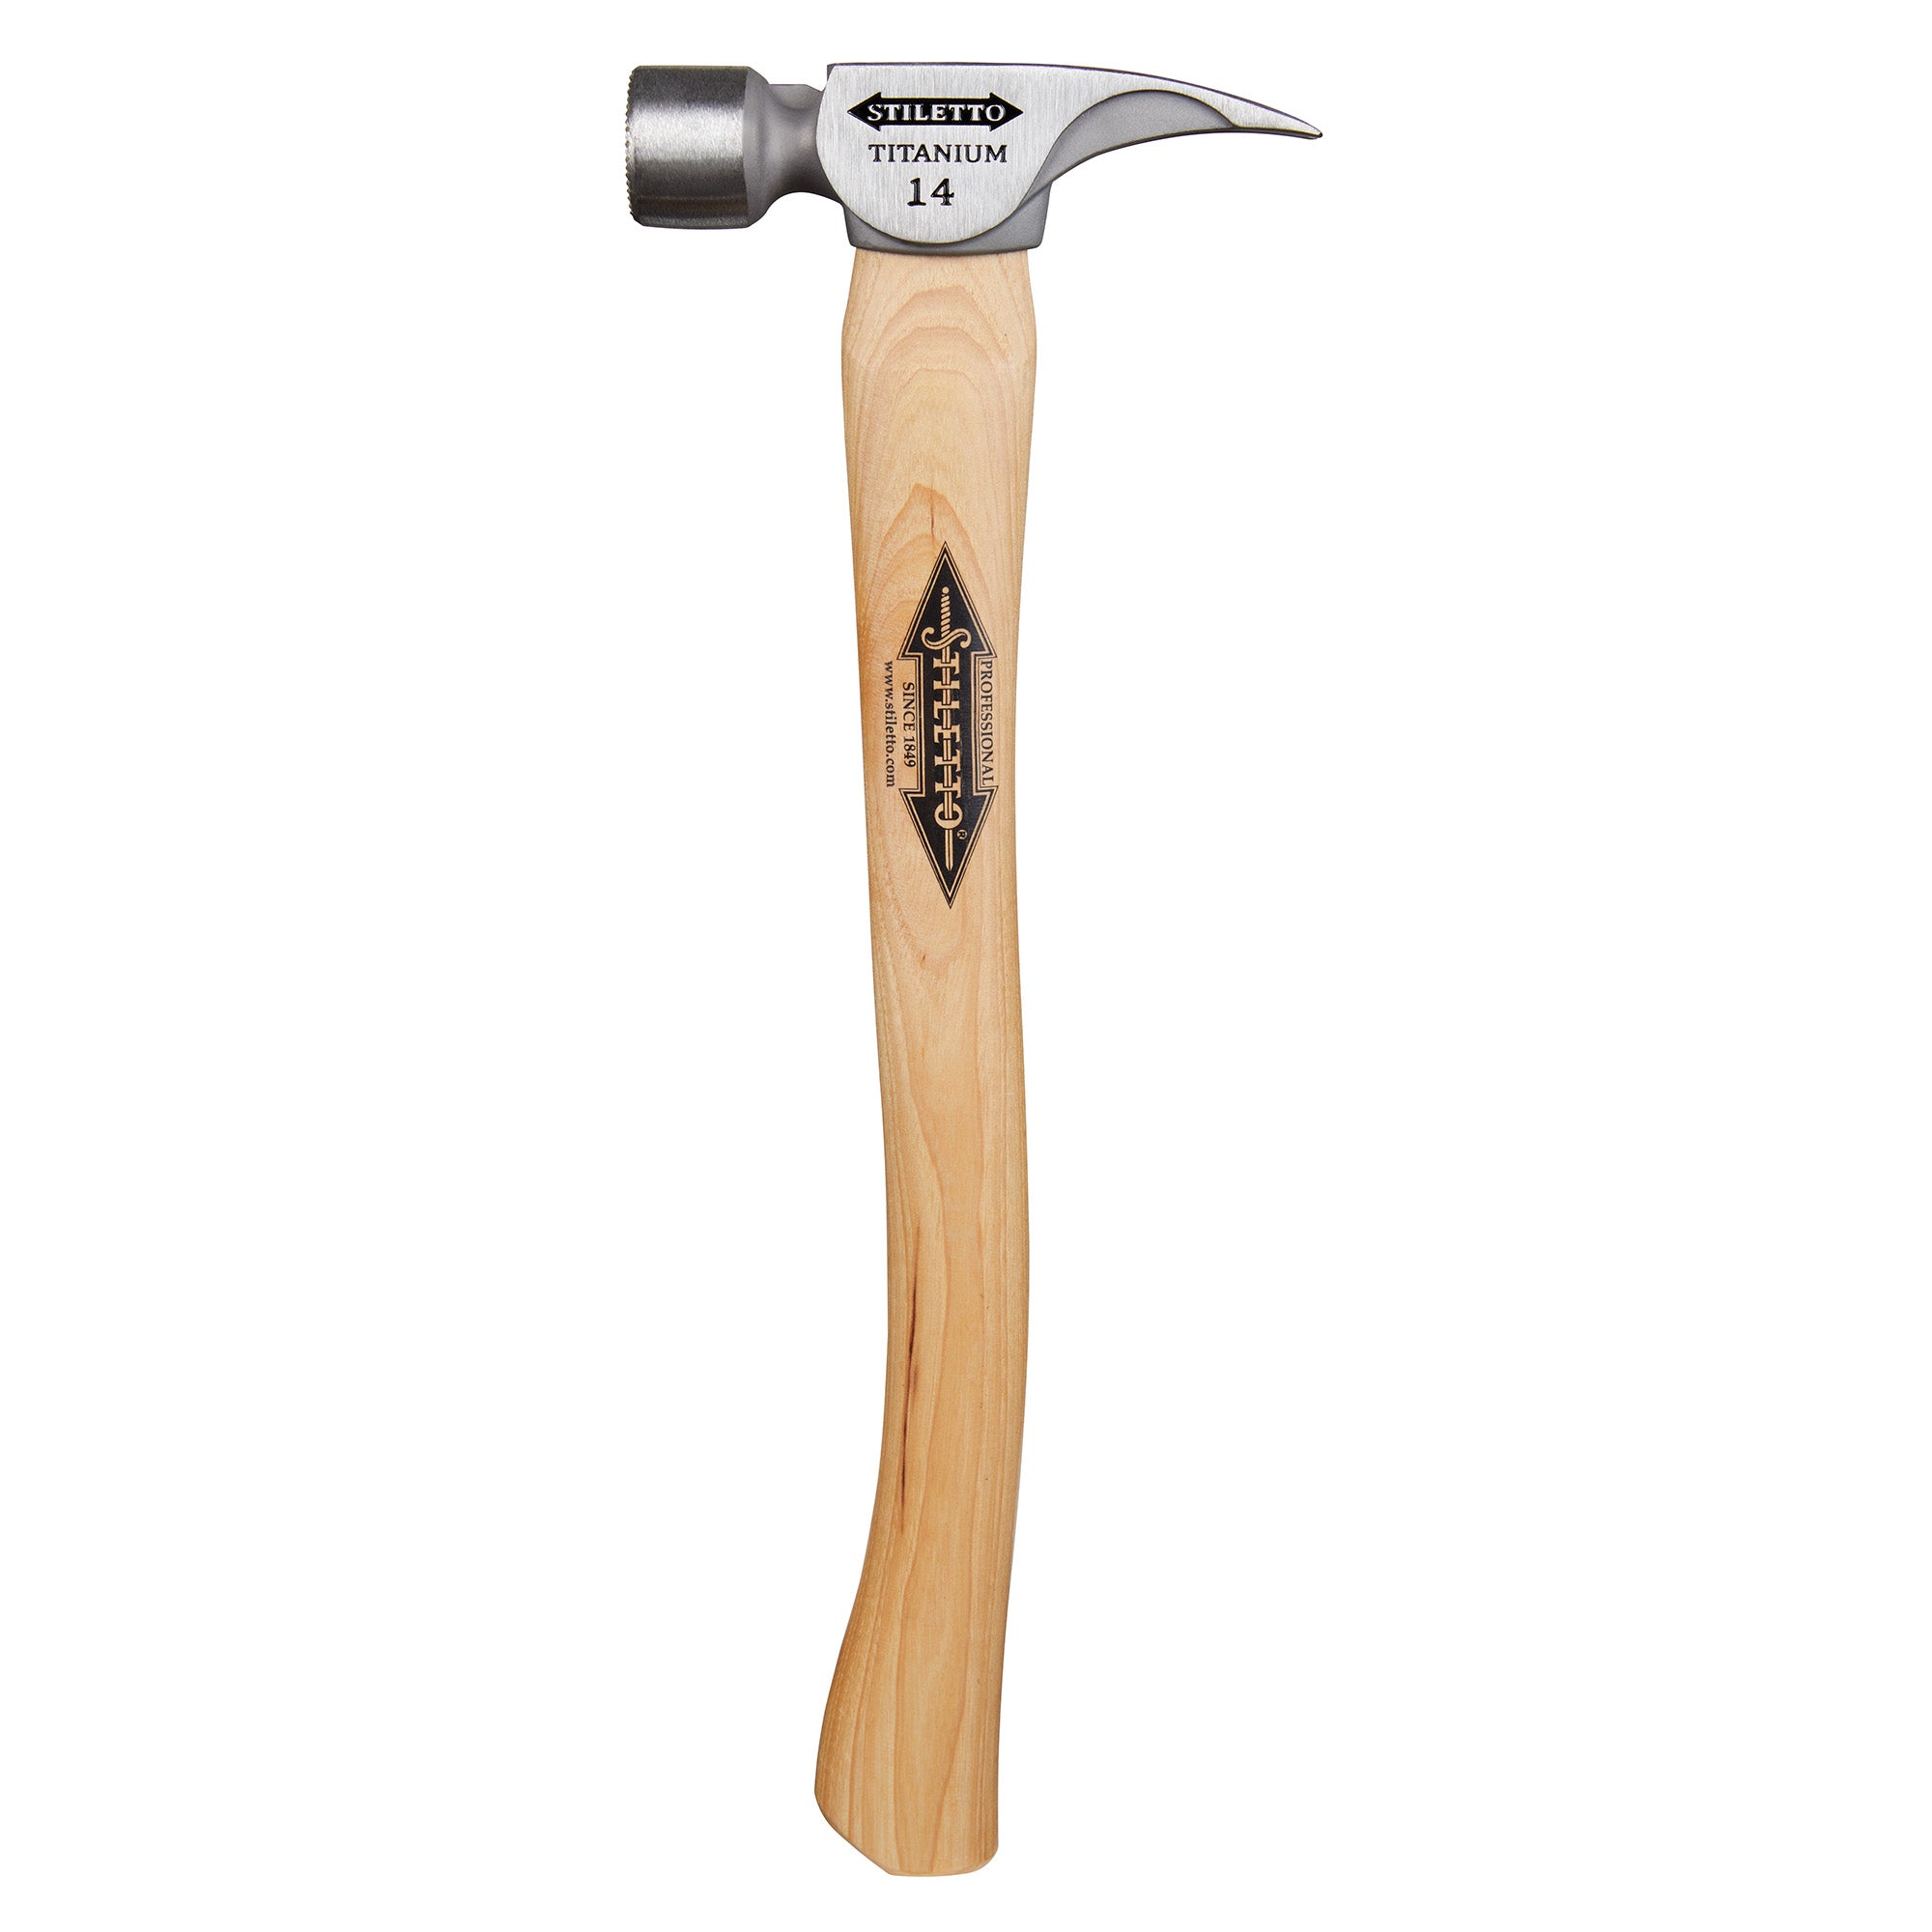 18" Hickory Curved Handle 14 oz. Titanium Head Round Milled Face Straight Claw Hammer